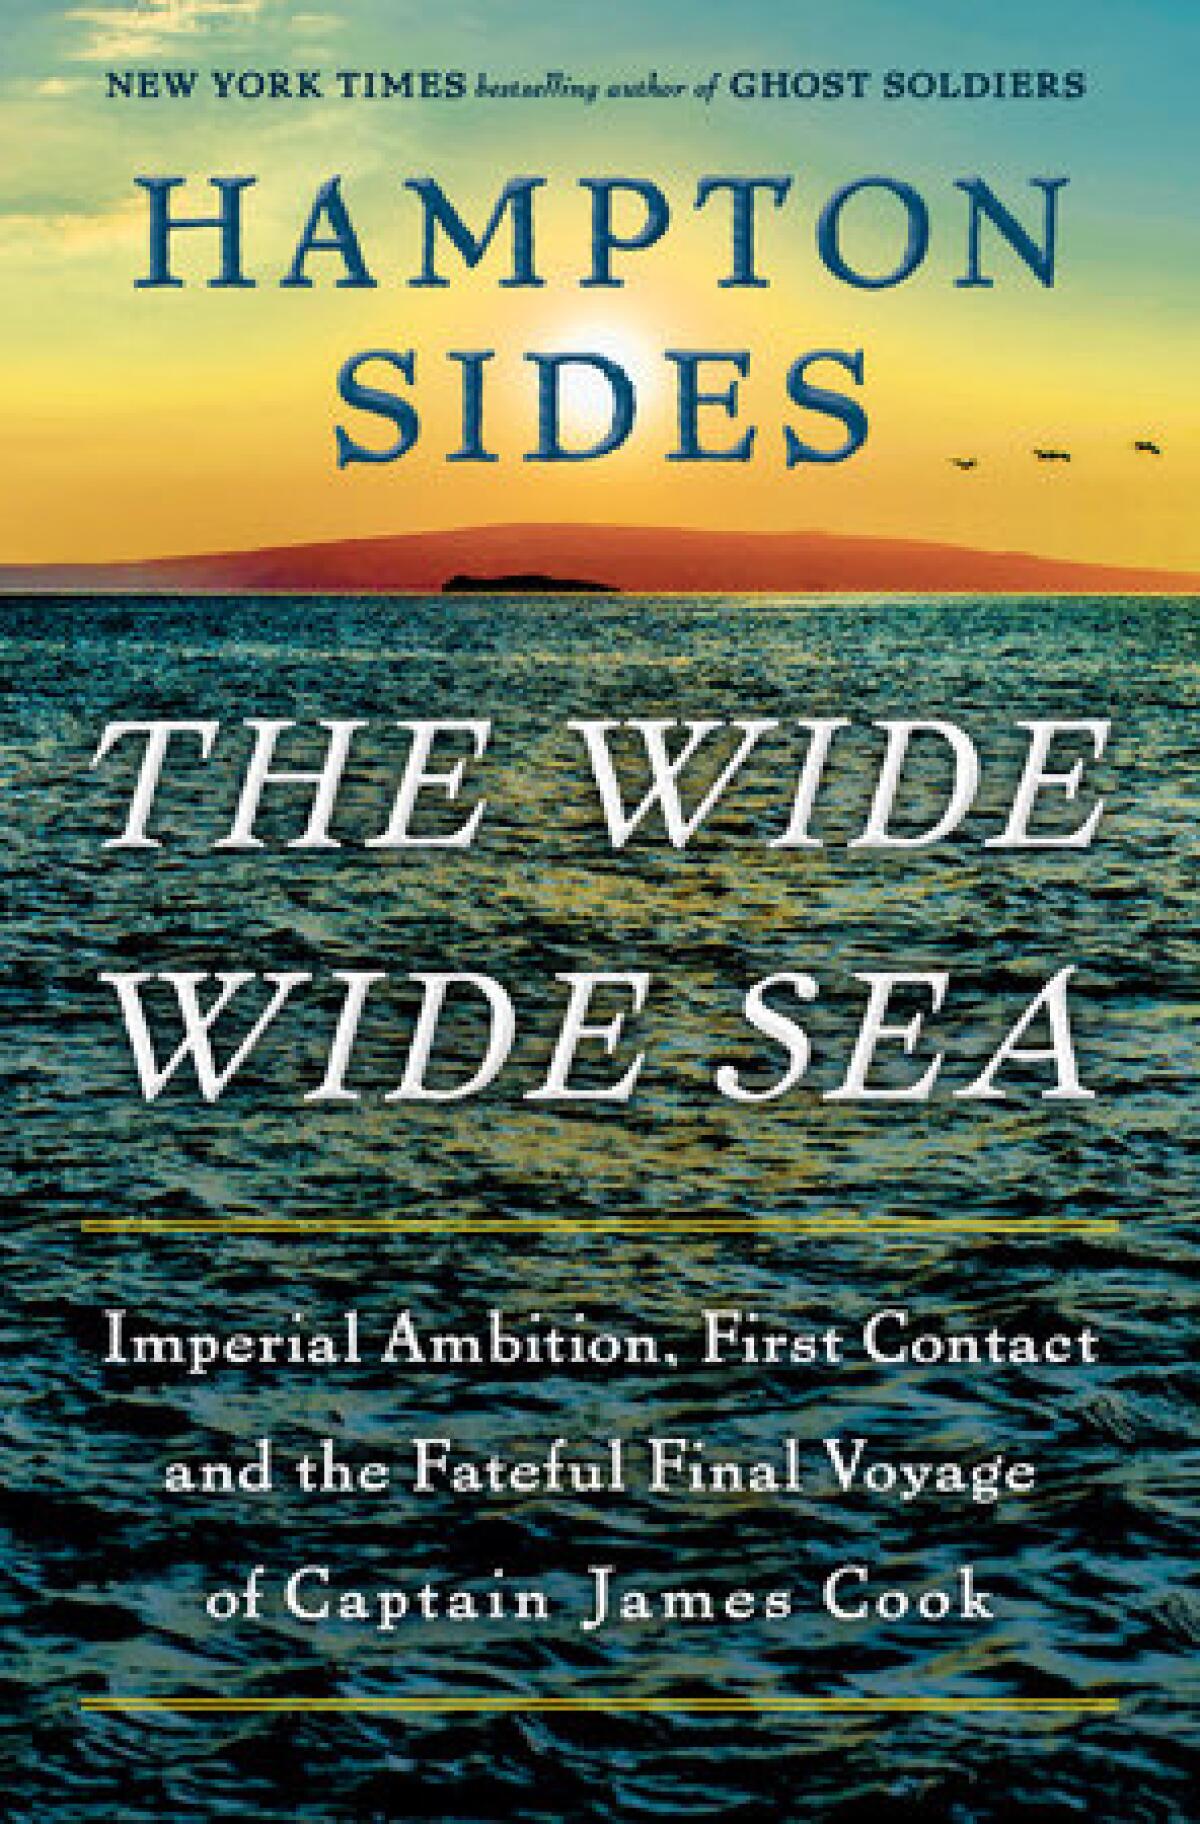 Cover of the book "The Wide Wide Sea"